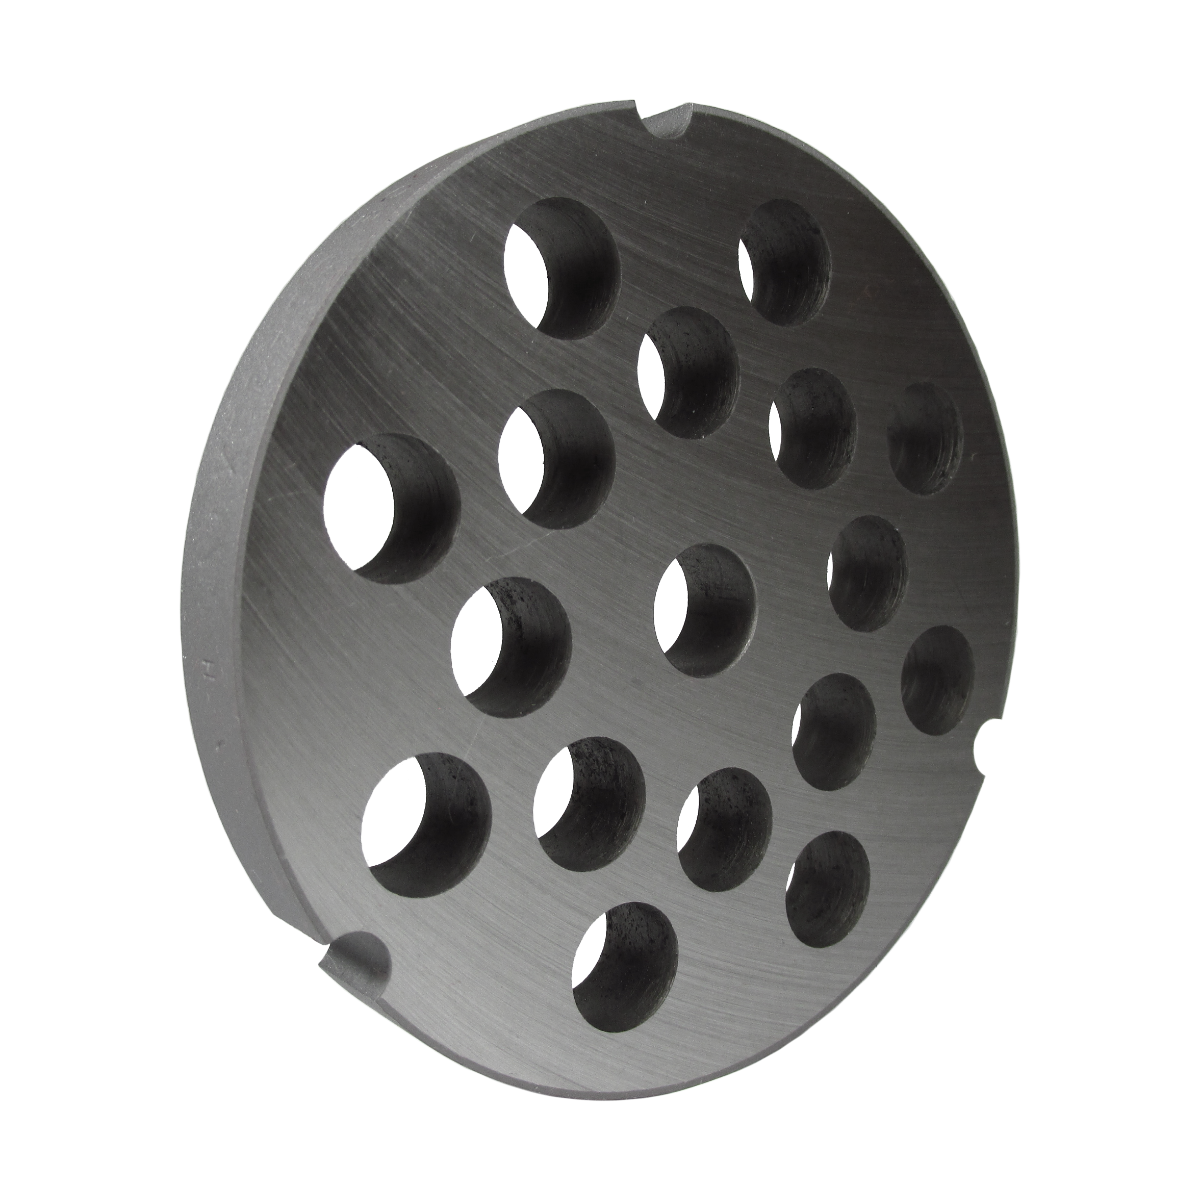 Grinder plate for #32 grinders with 3/8" hole, reversible